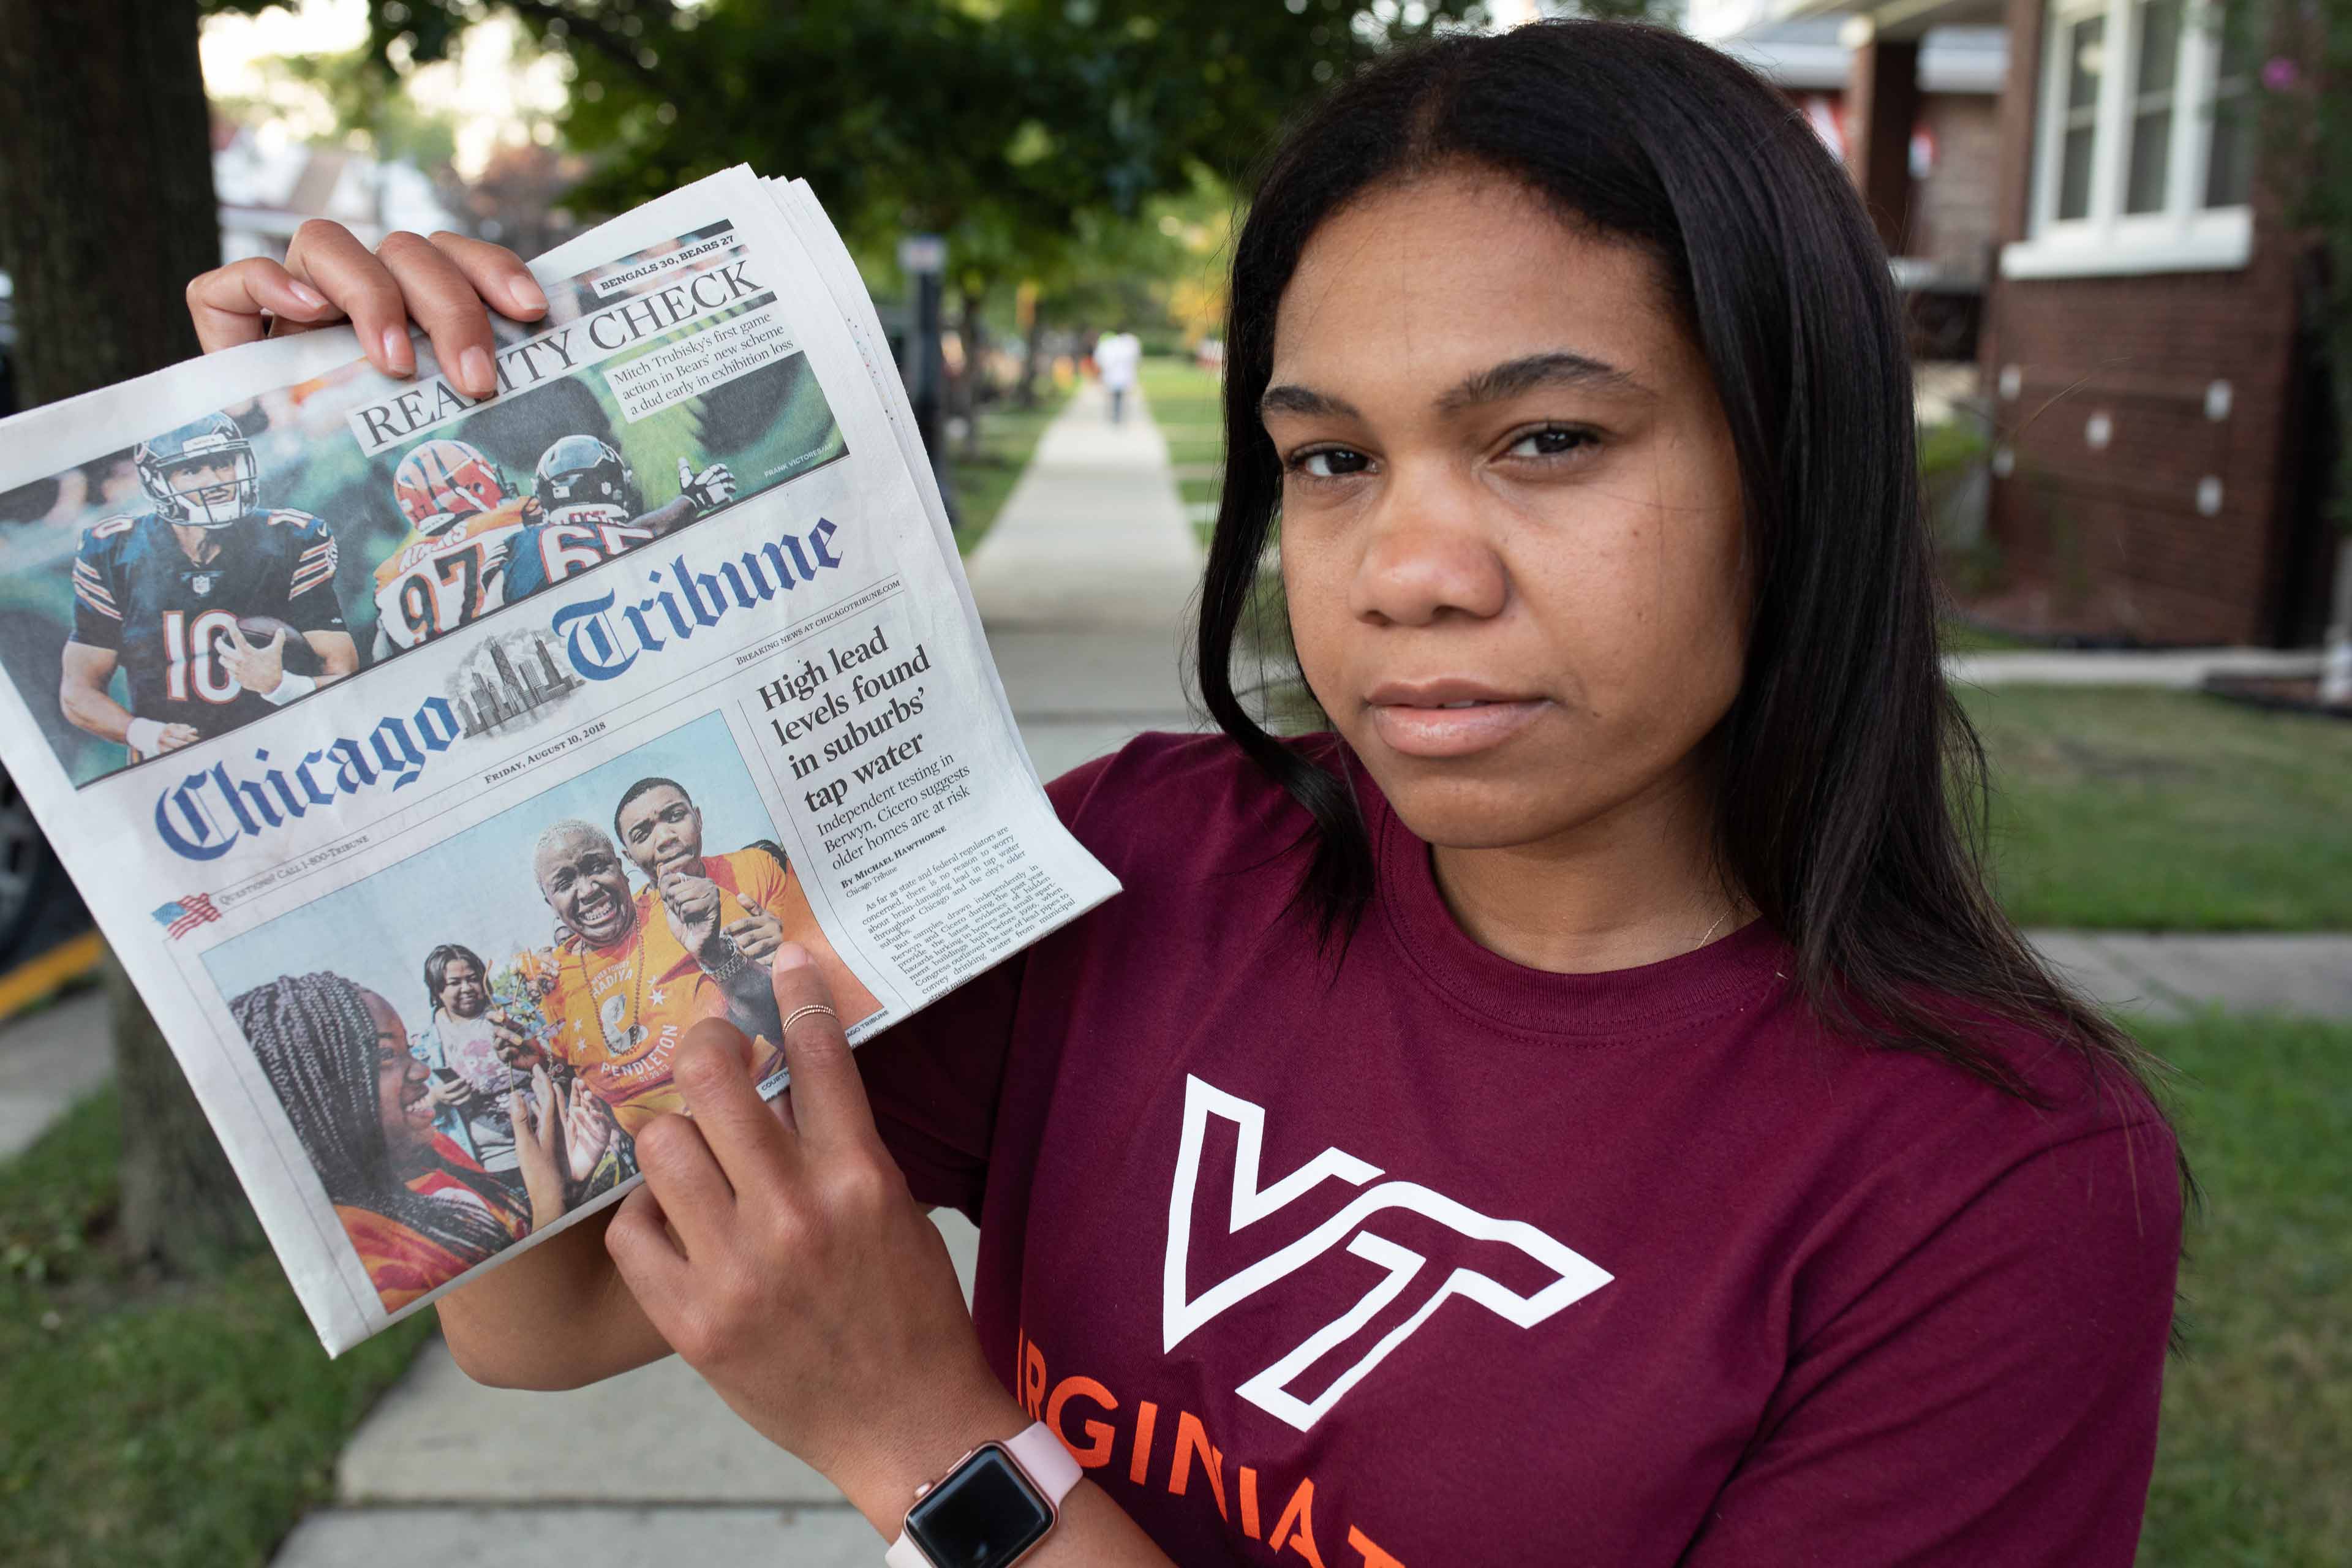 Chivonne Battle holding the Chicago Tribune with the water story on the cover.